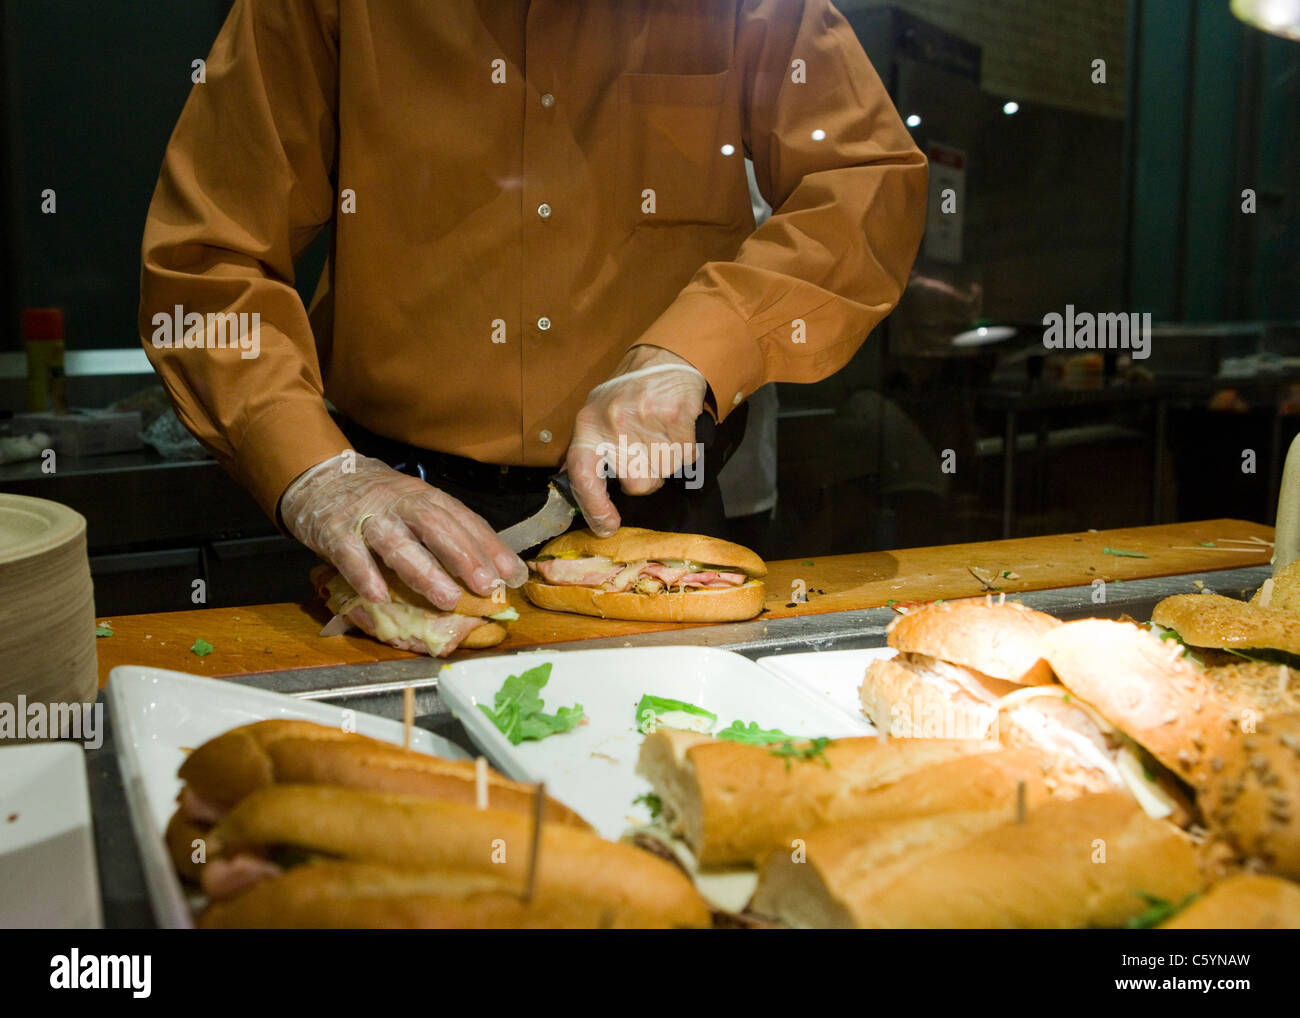 Cook preparing sandwiches behind cafeteria counter Stock Photo